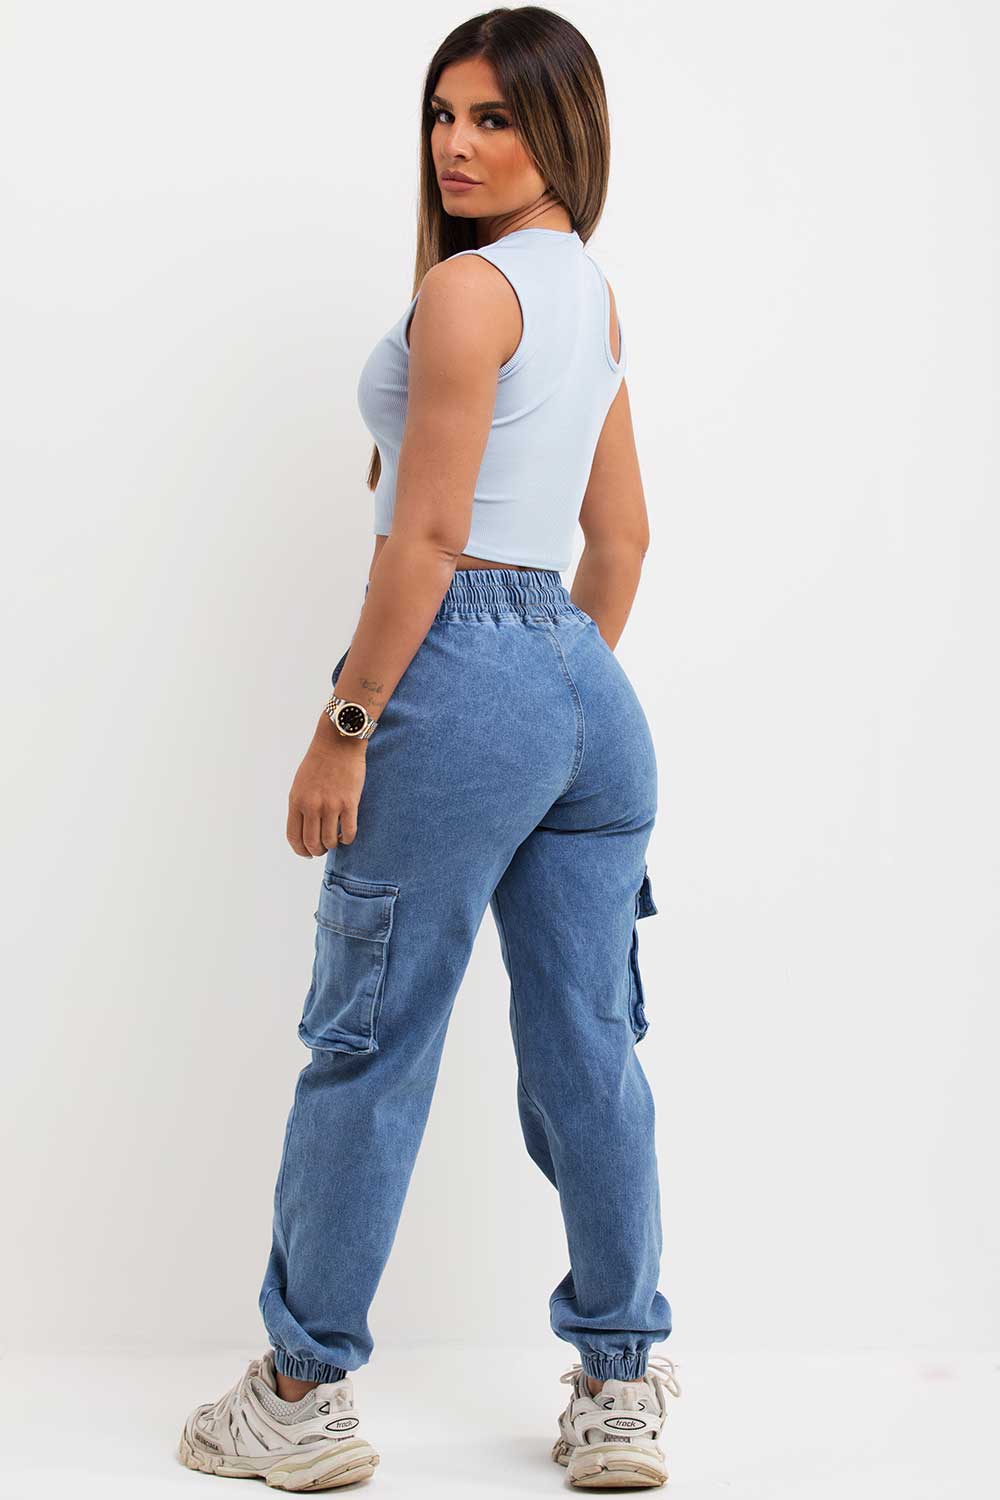 Women's Cargo Jeans With Elasticated Drawstring Waist –